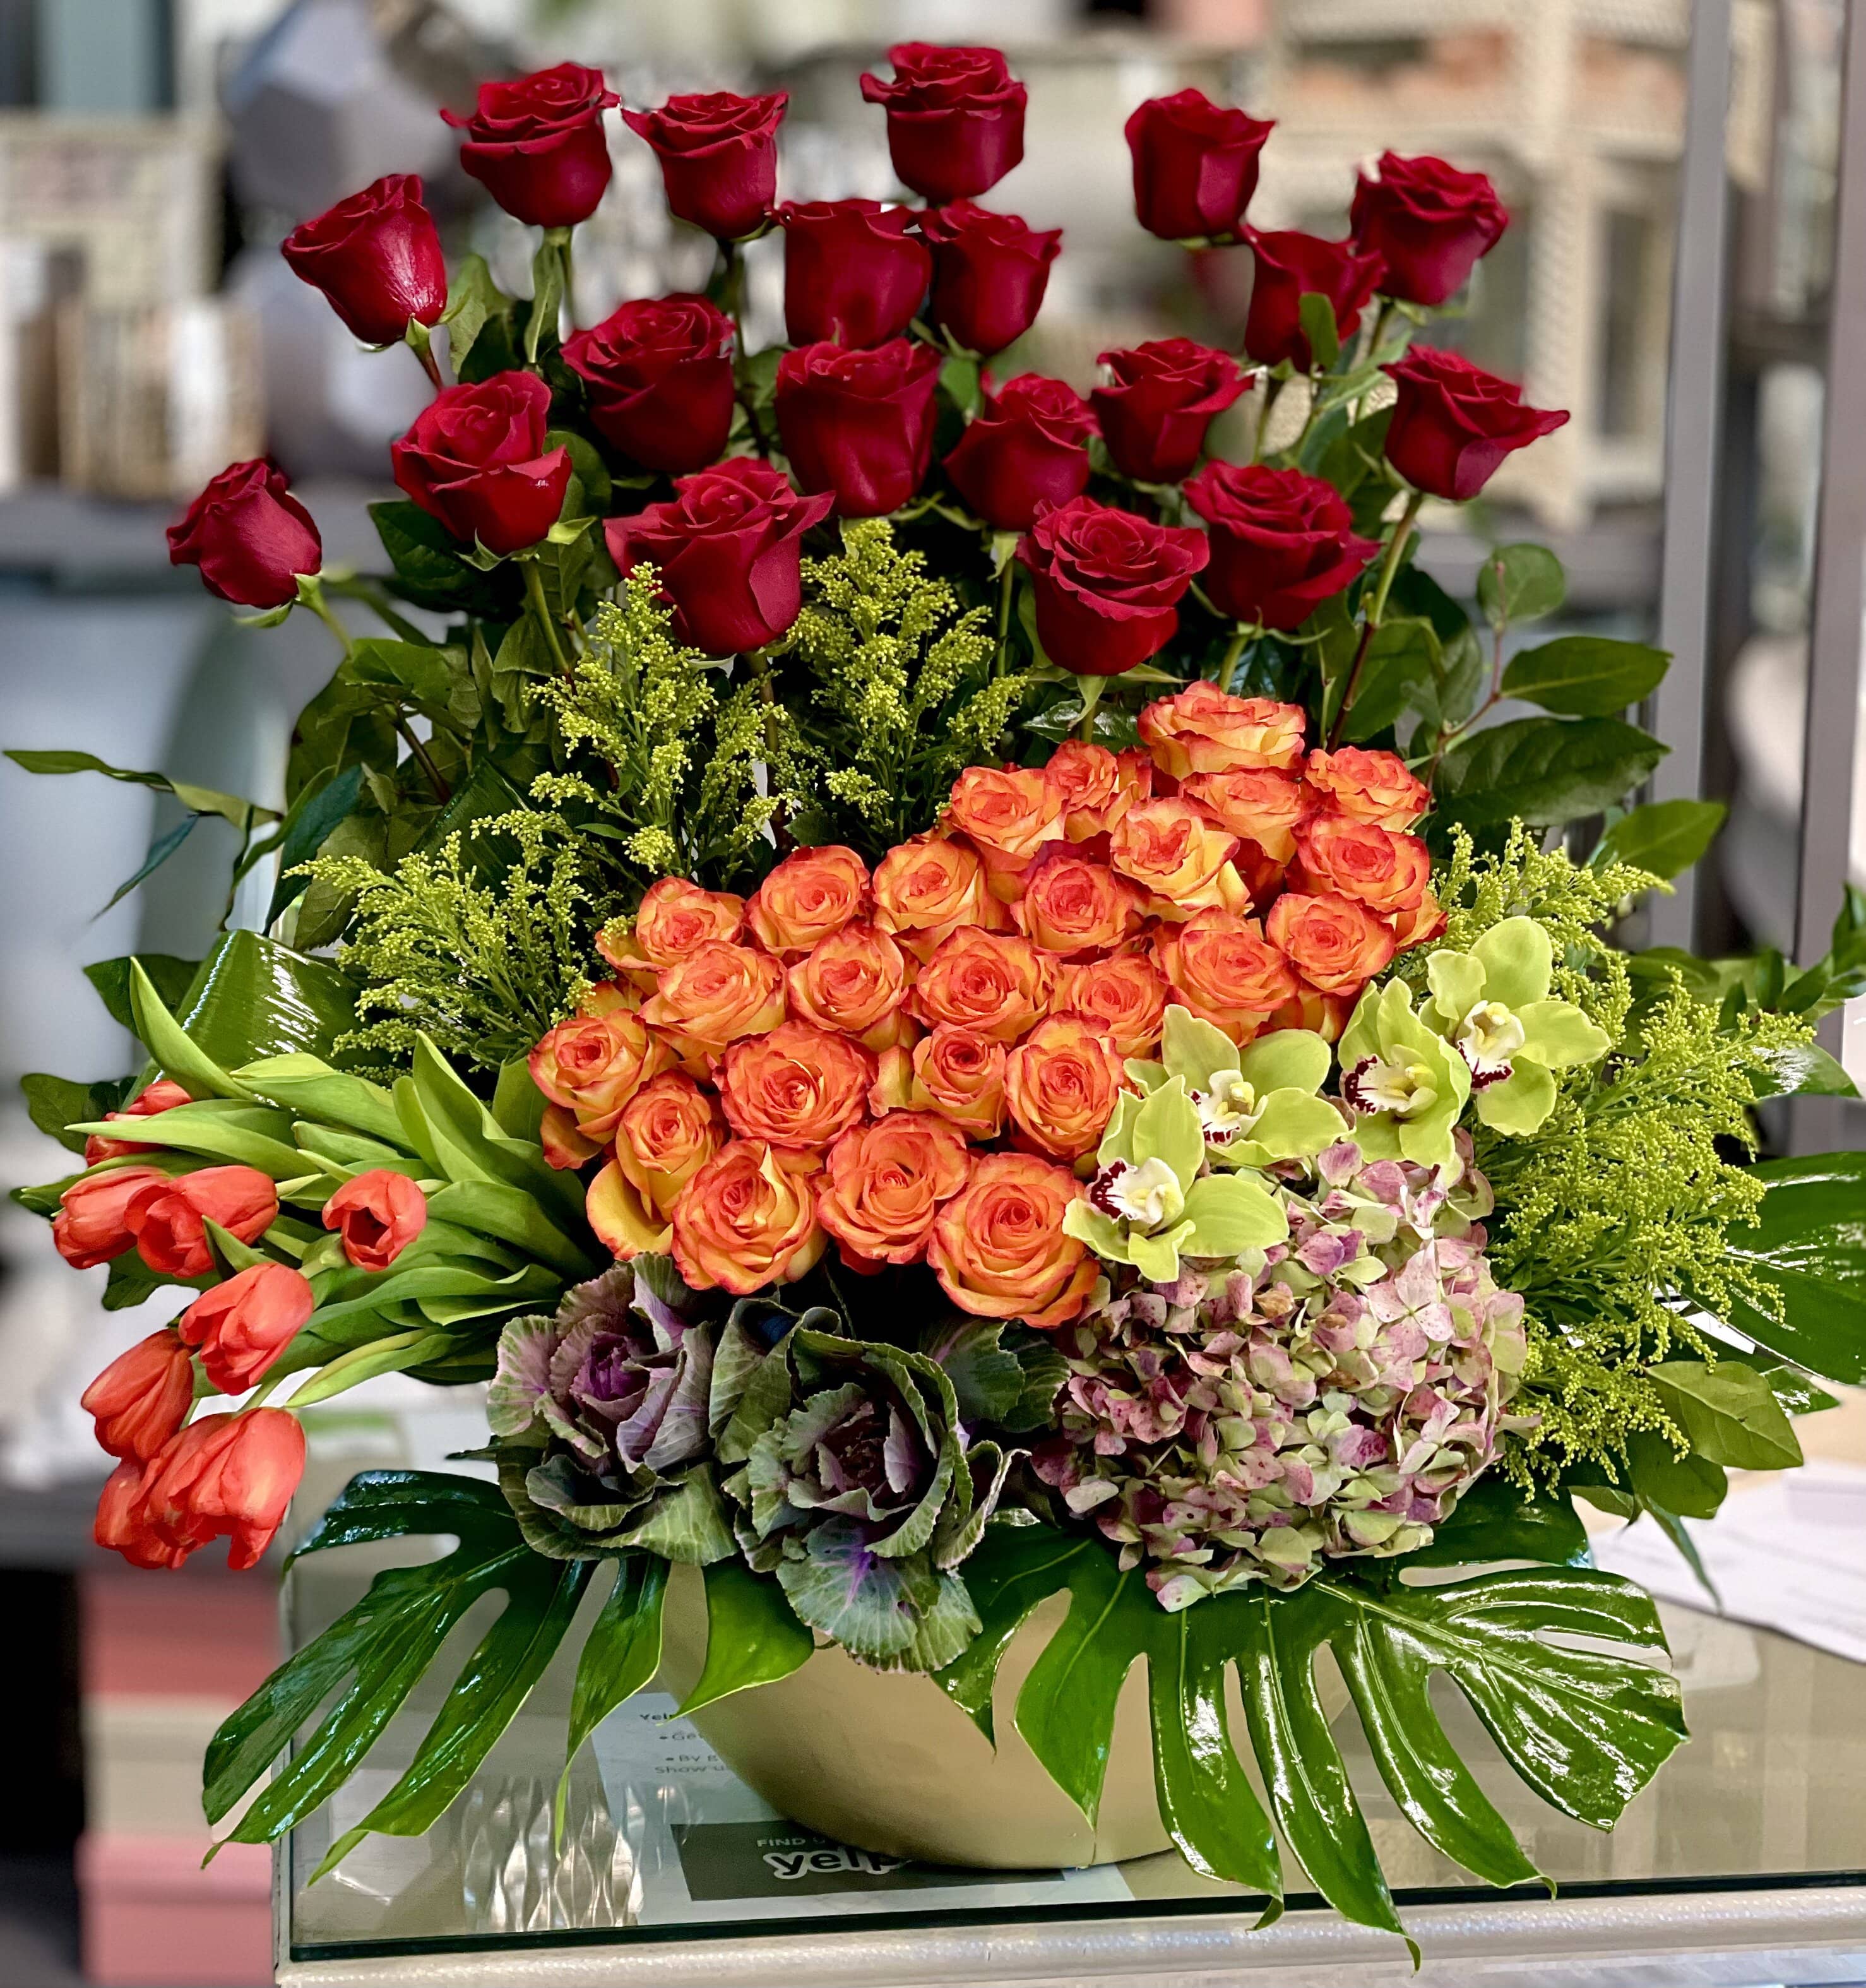 The Wildest Dreams  - Red Roses, Orange Roses, Green Cymbidium Orchids, Orange Tulips, Hydrangeas, and Monstera Leaves in a large round vase.